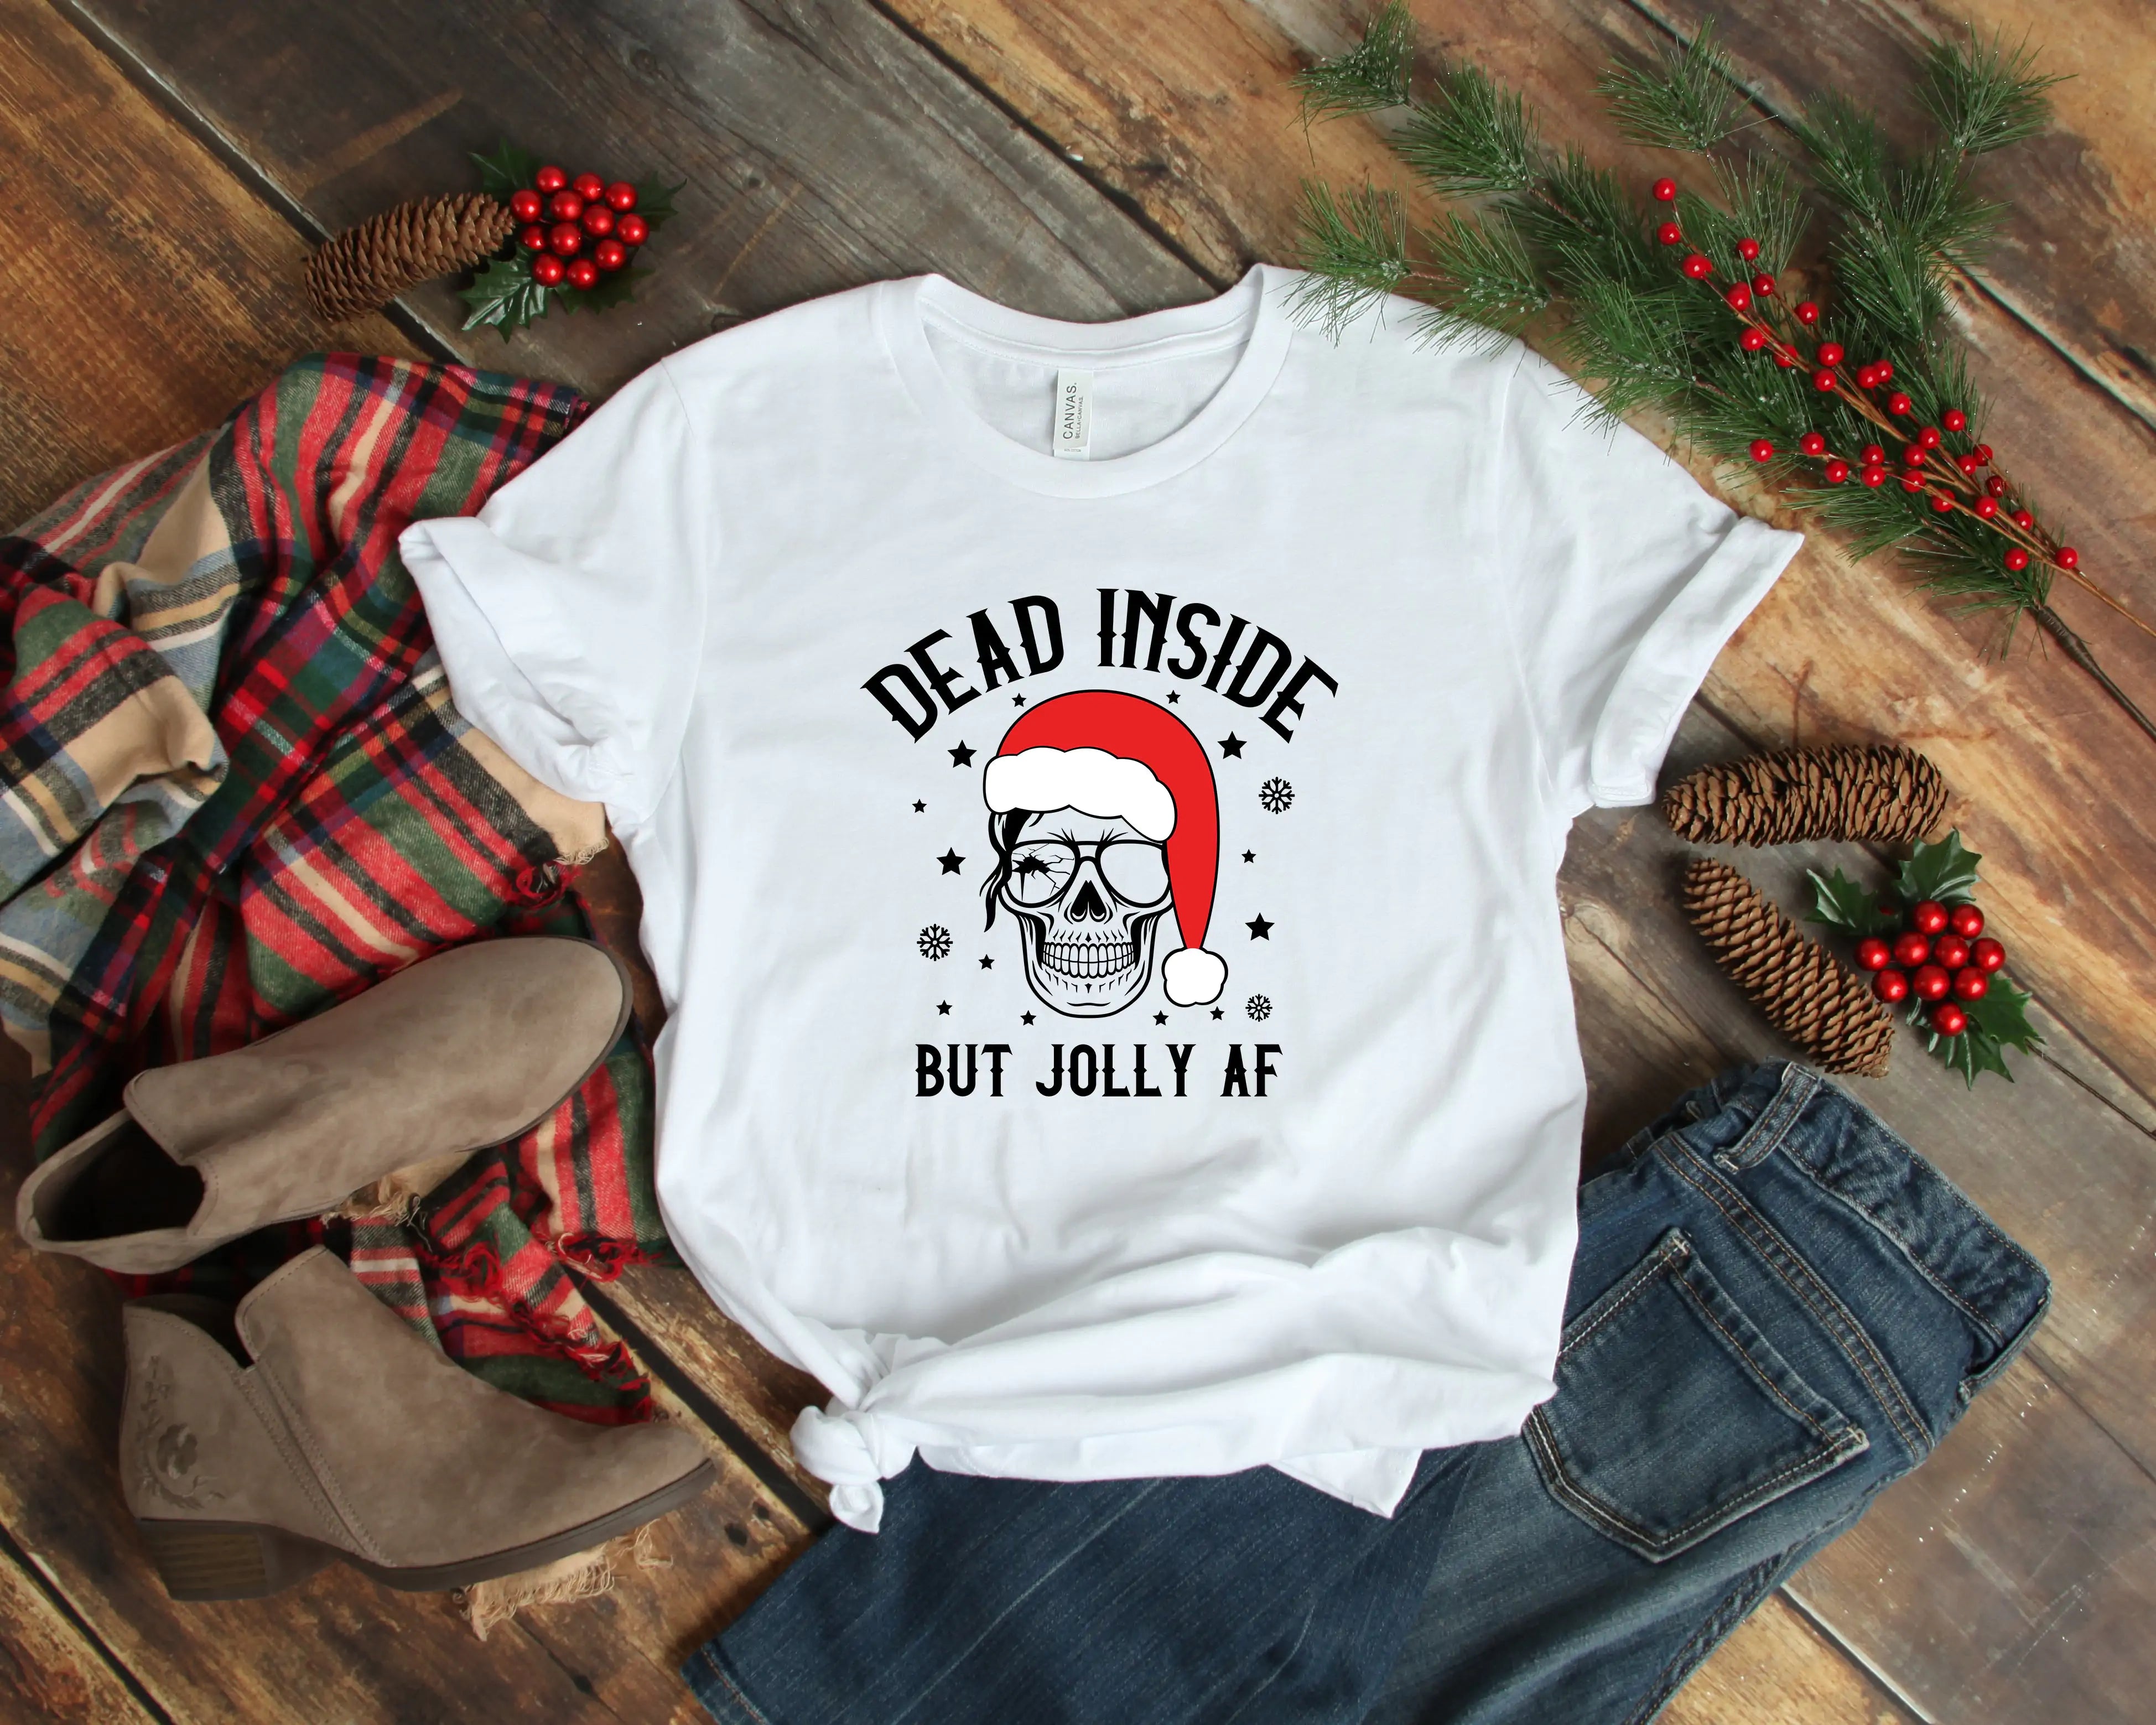 A festive Dead Inside But Jolly AF Christmas Skeleton Shirt with holiday decorations and casual attire, available in unisex sizes.